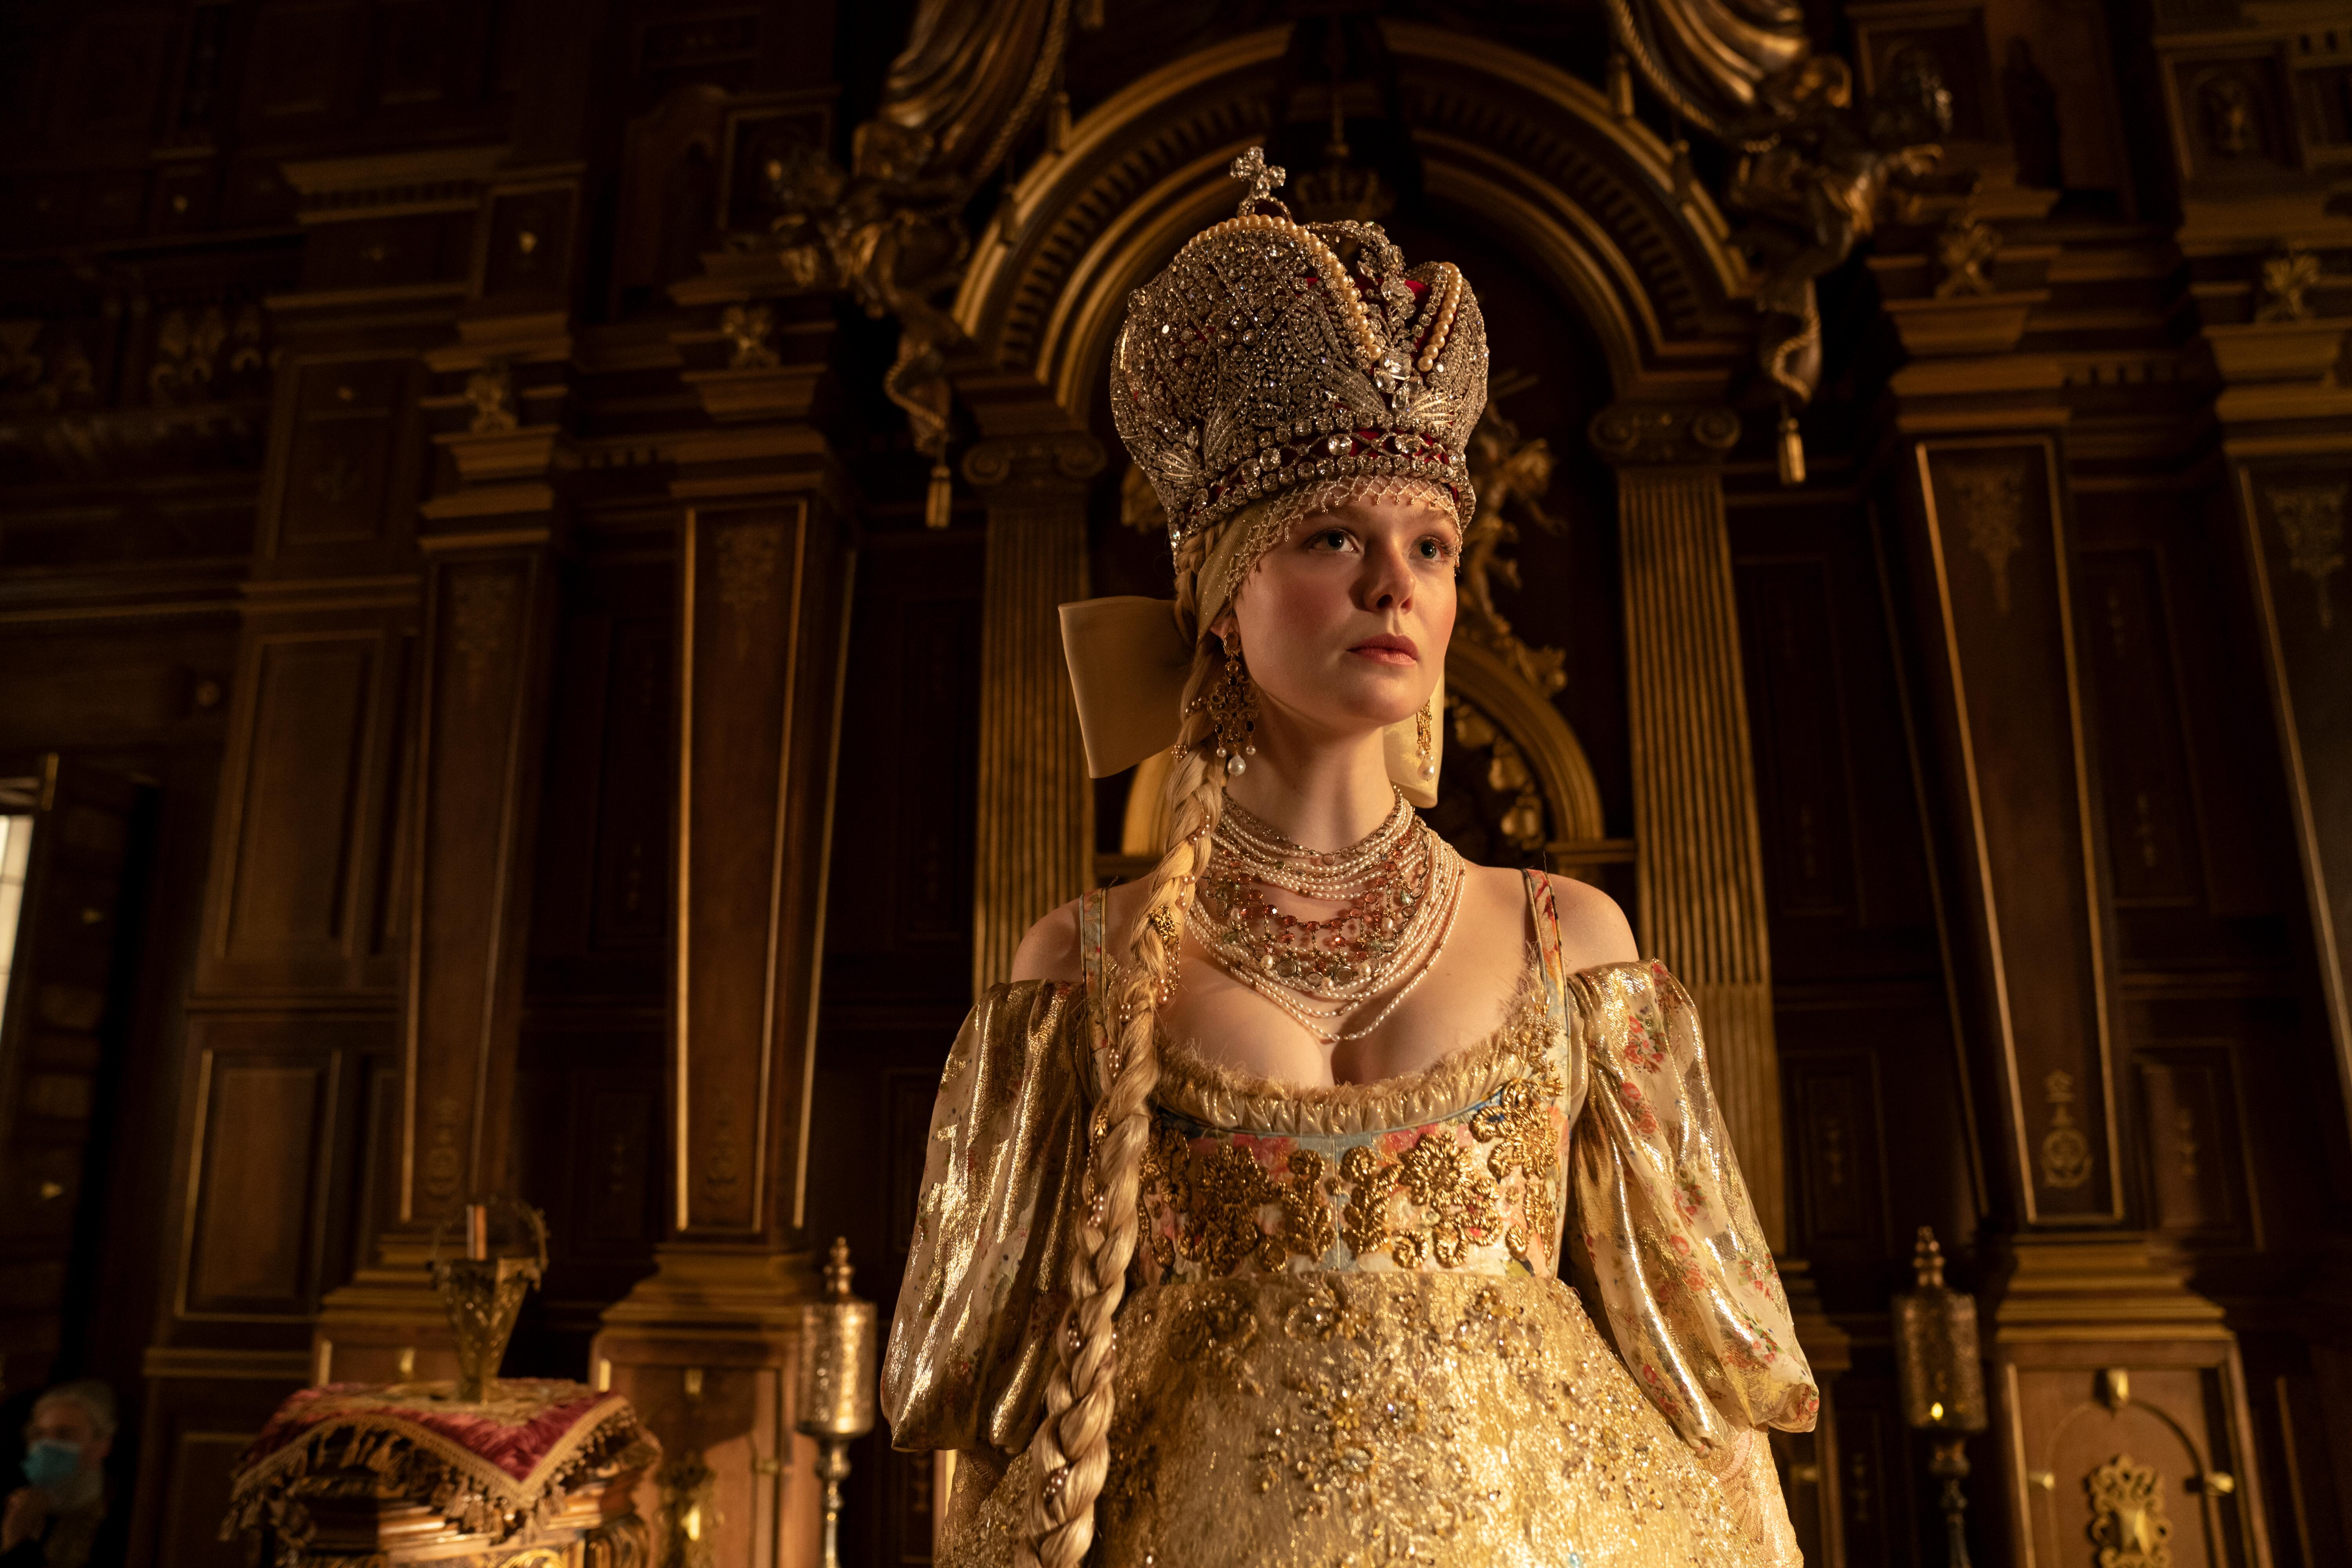 Elle Fanning as Catherine on her throne in 'The Great' Season 2